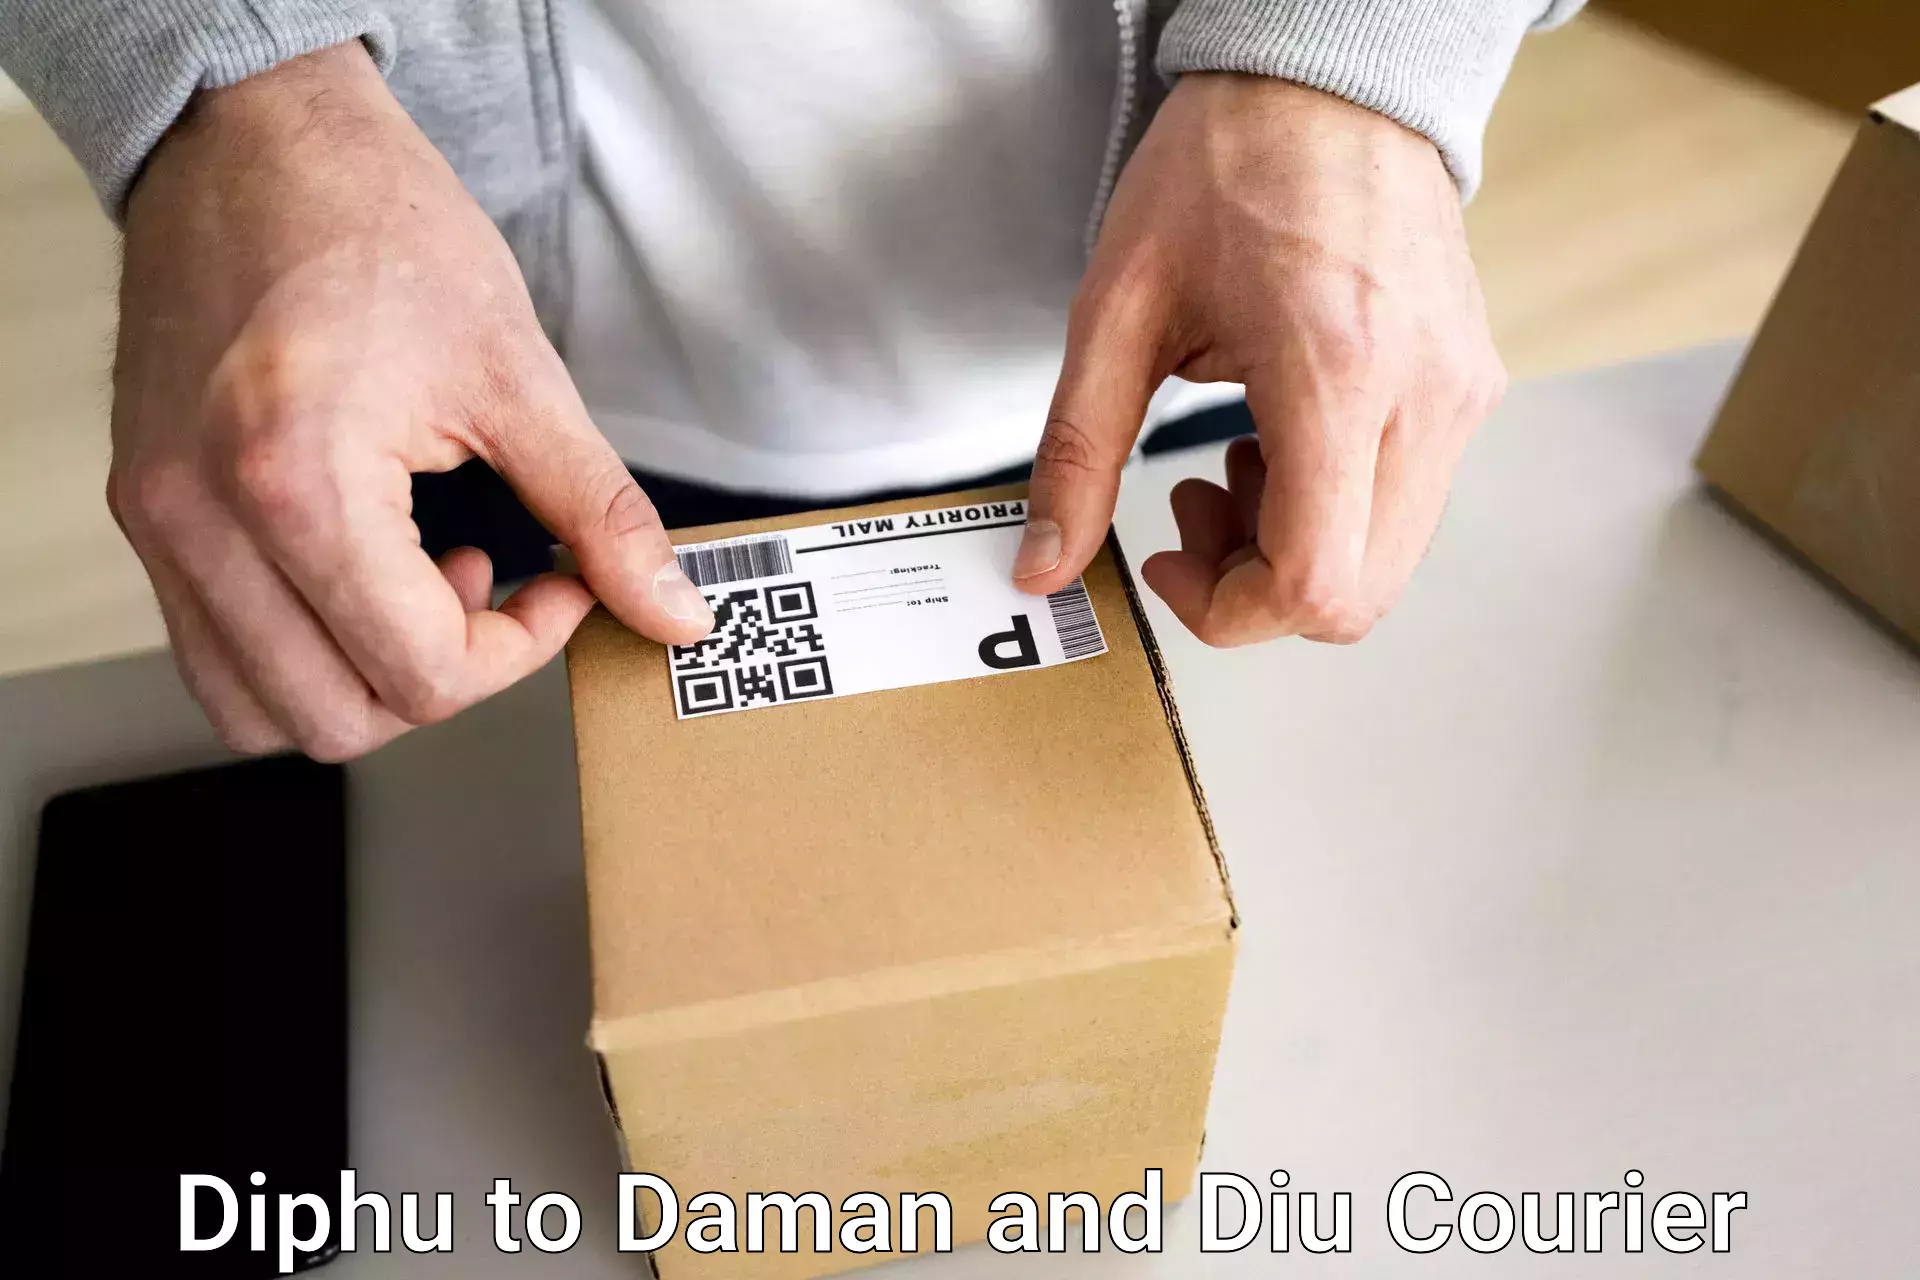 Luggage delivery providers Diphu to Diu